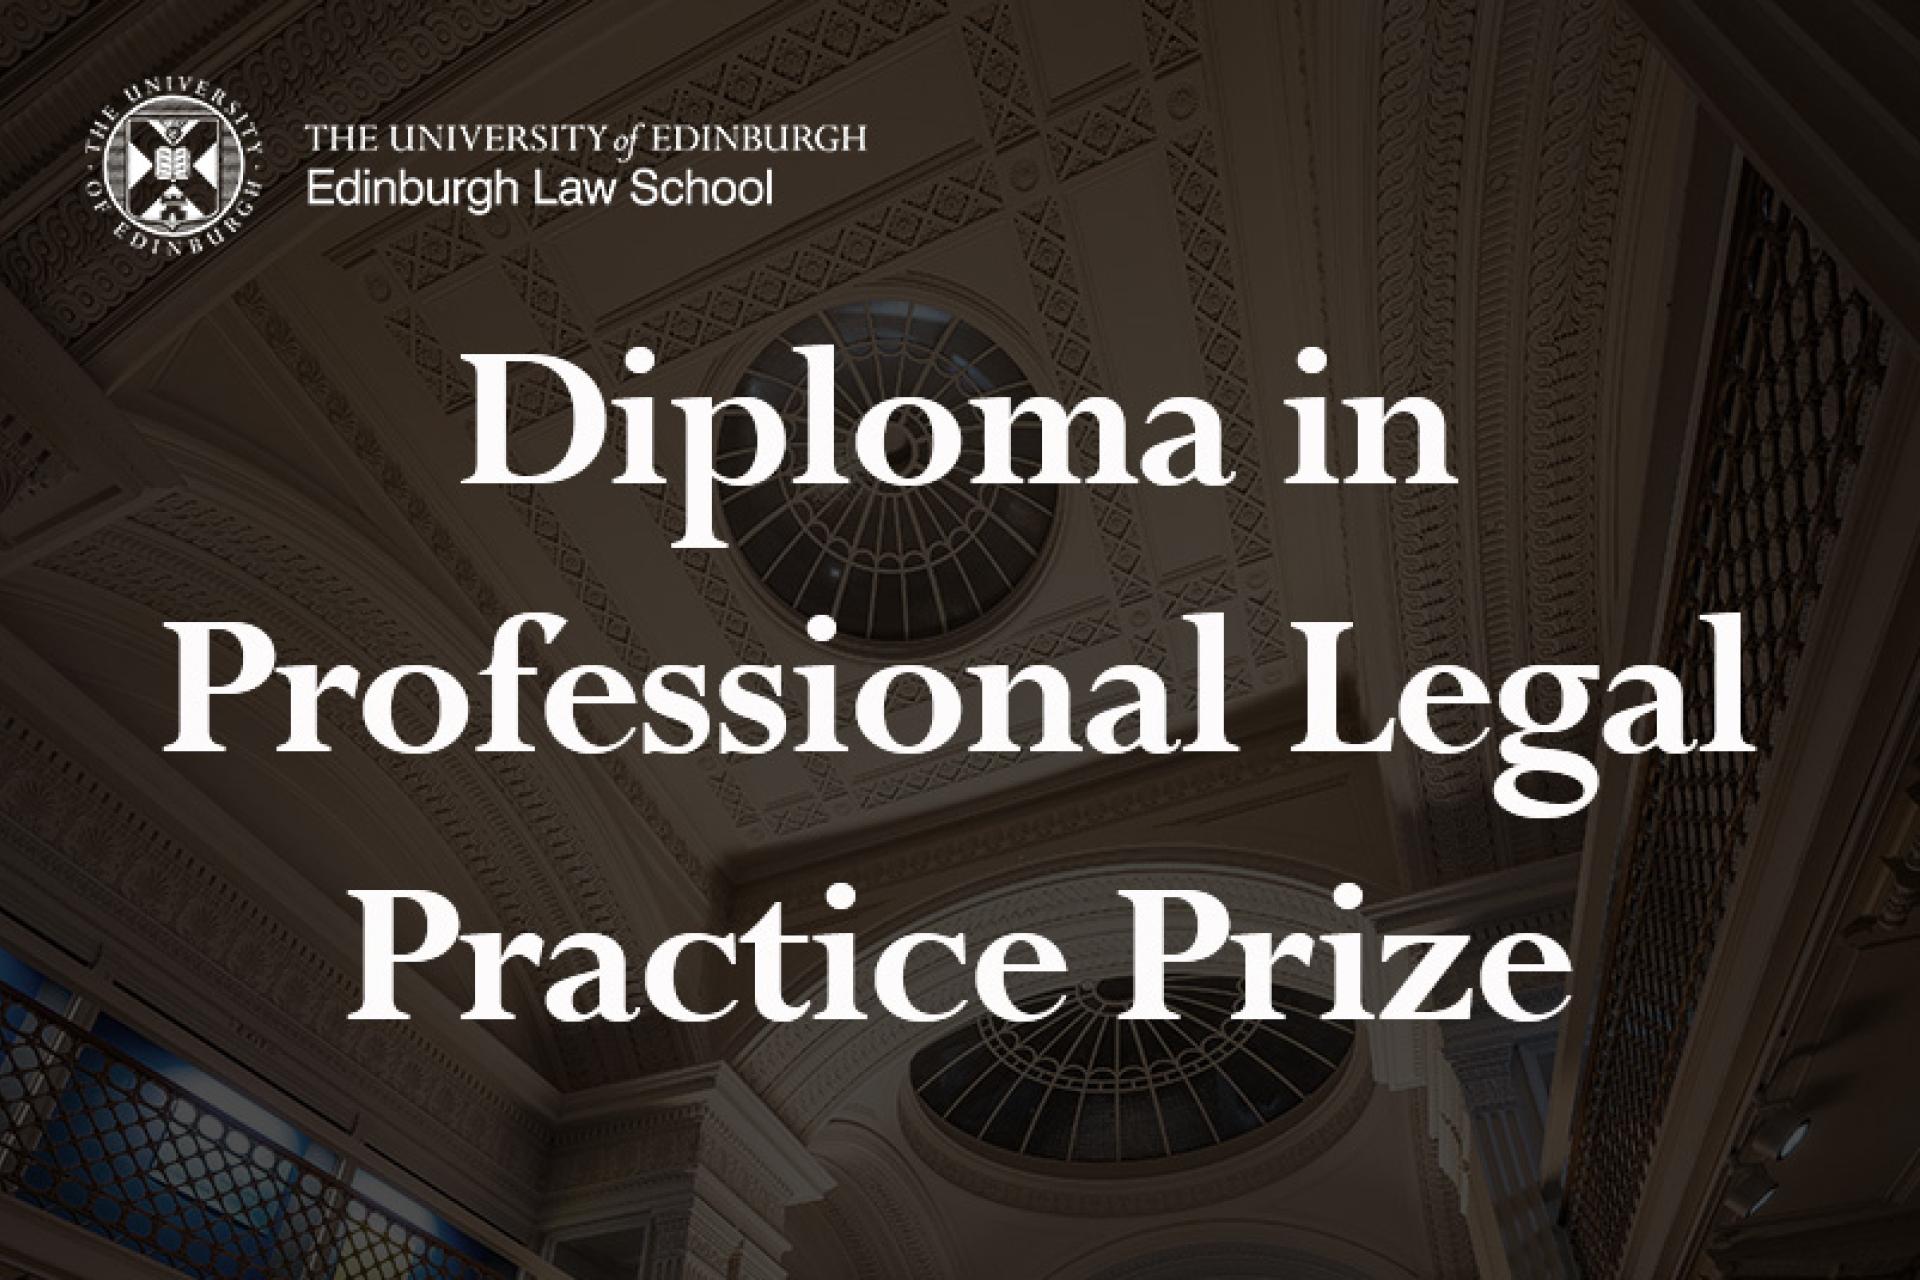 Diploma in Professional Legal Practice Prize